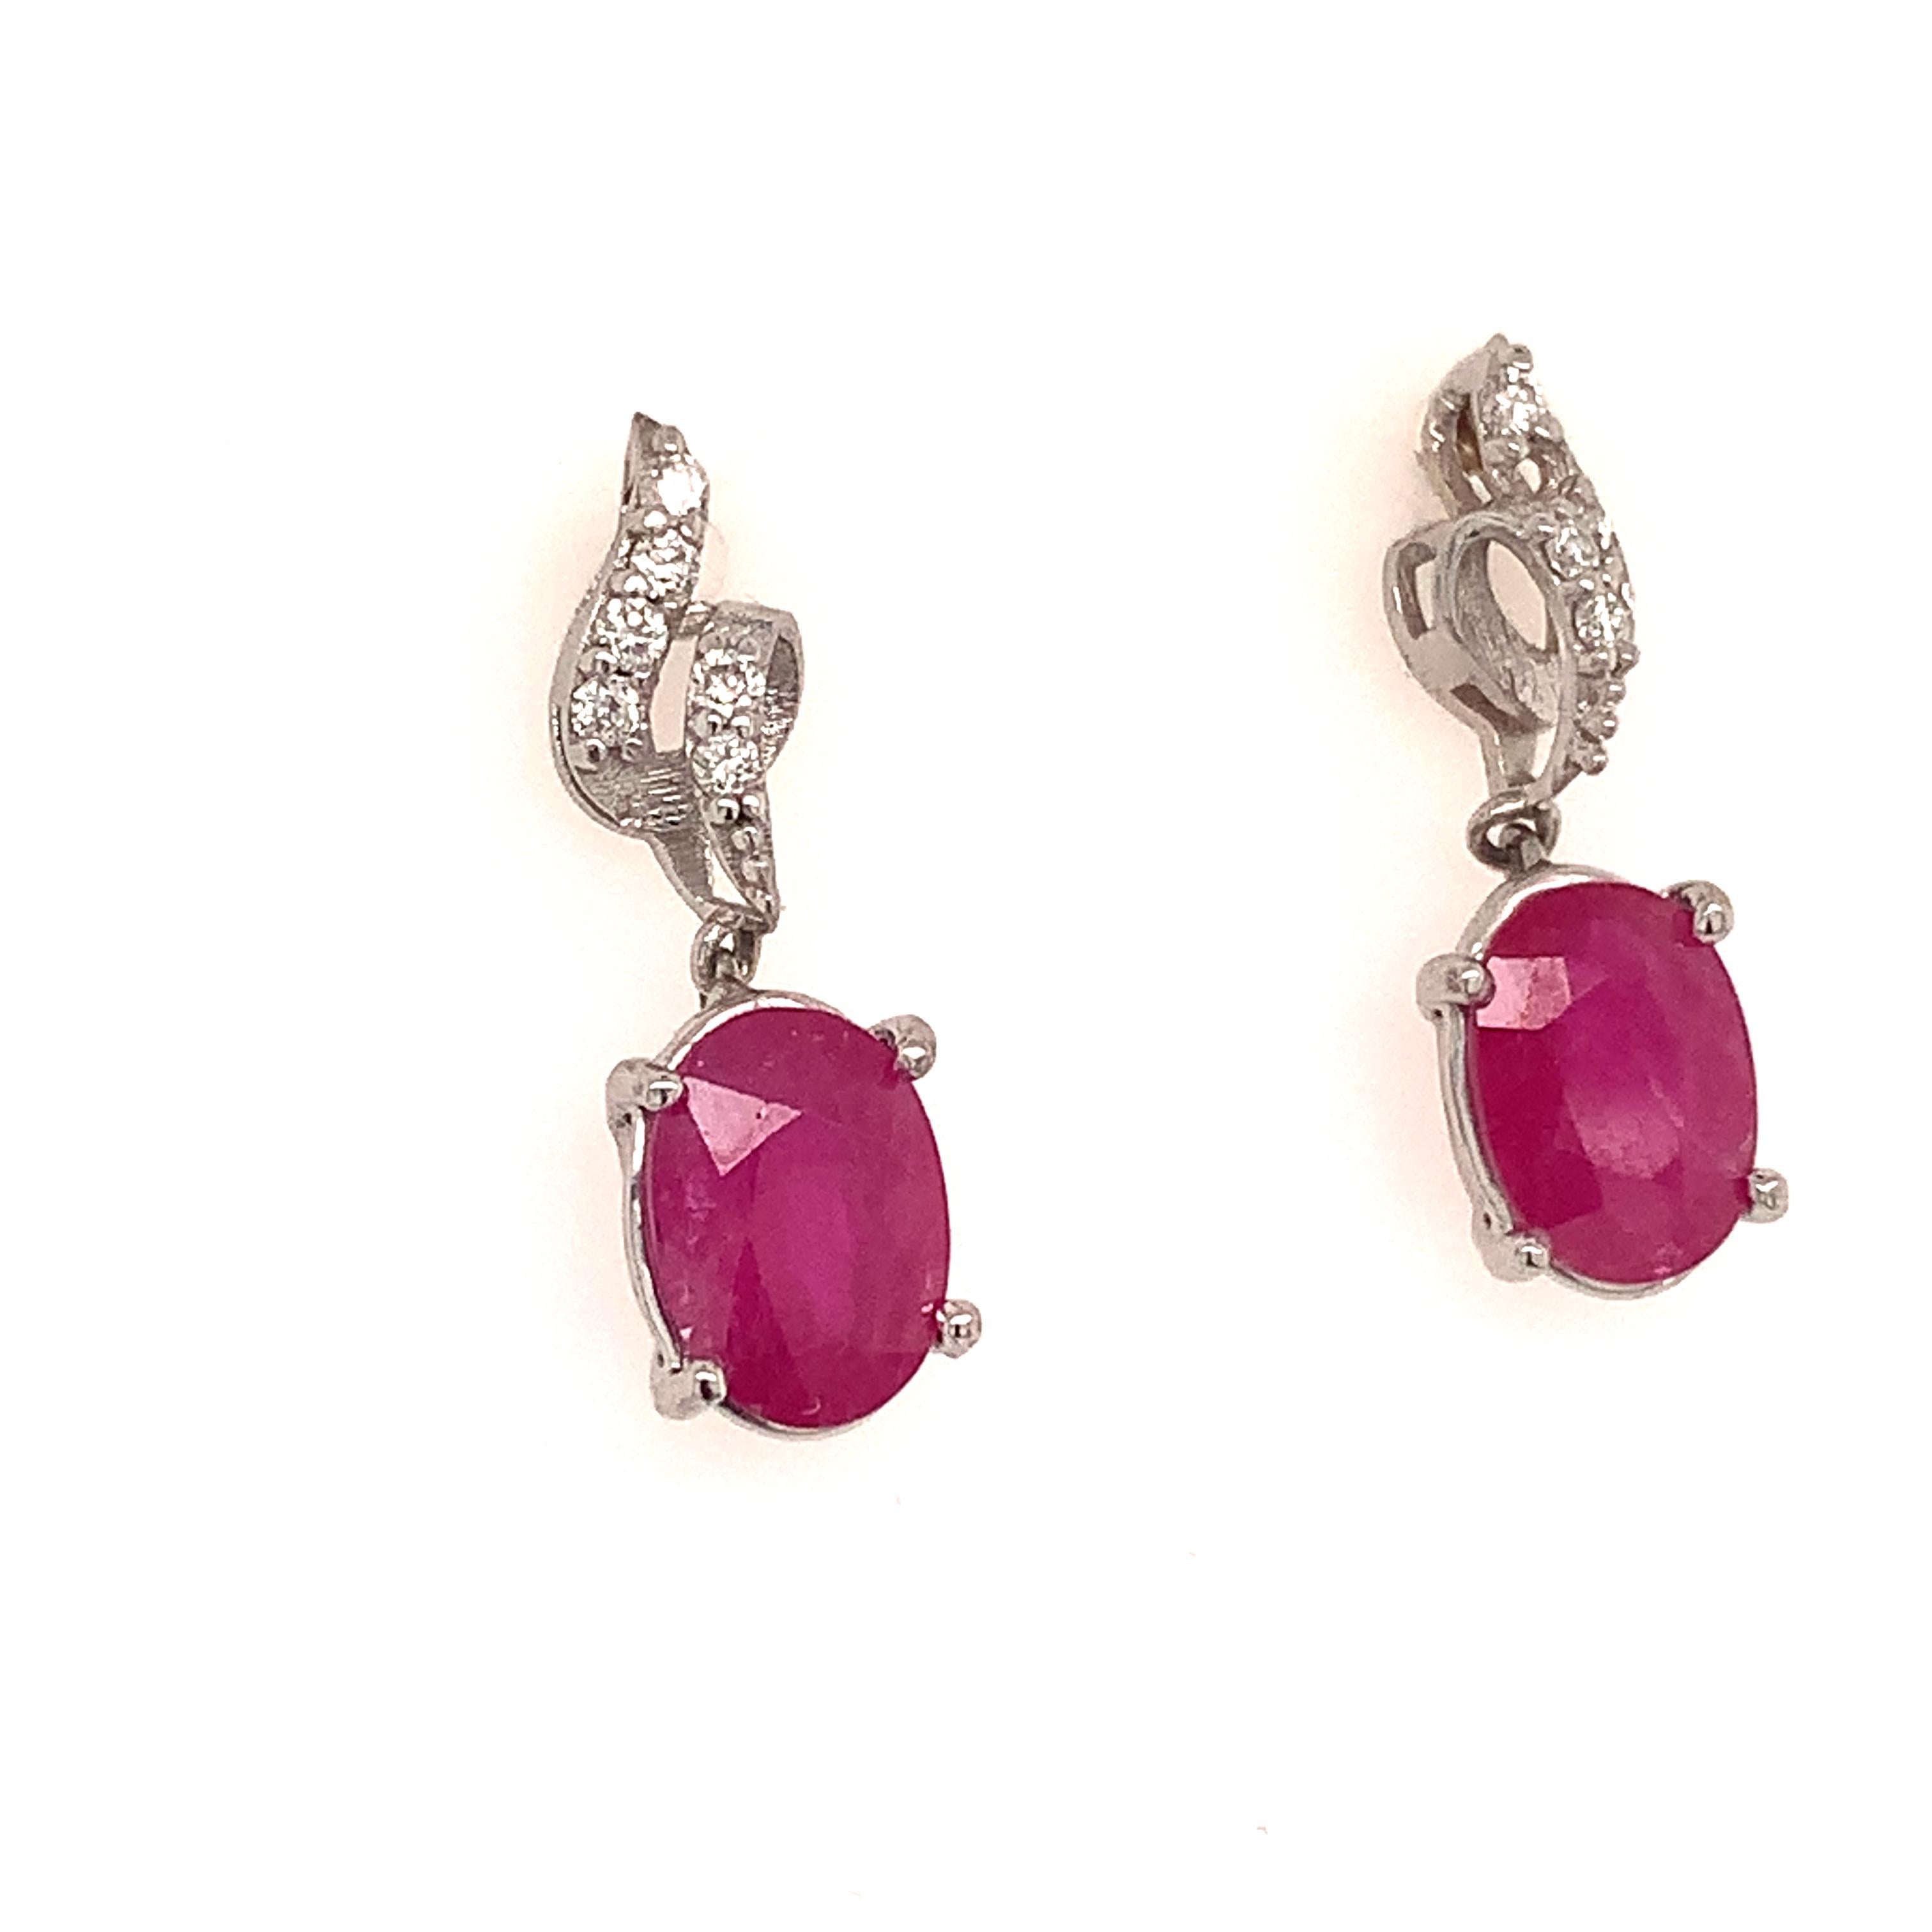 Natural Finely Faceted Quality Ruby Diamond Earrings 14k Gold 1.55 TCW Certified $3,050 018663

Please look at the video attached for this item. With the video, you can see the movement of the item and appreciate the faceting and details